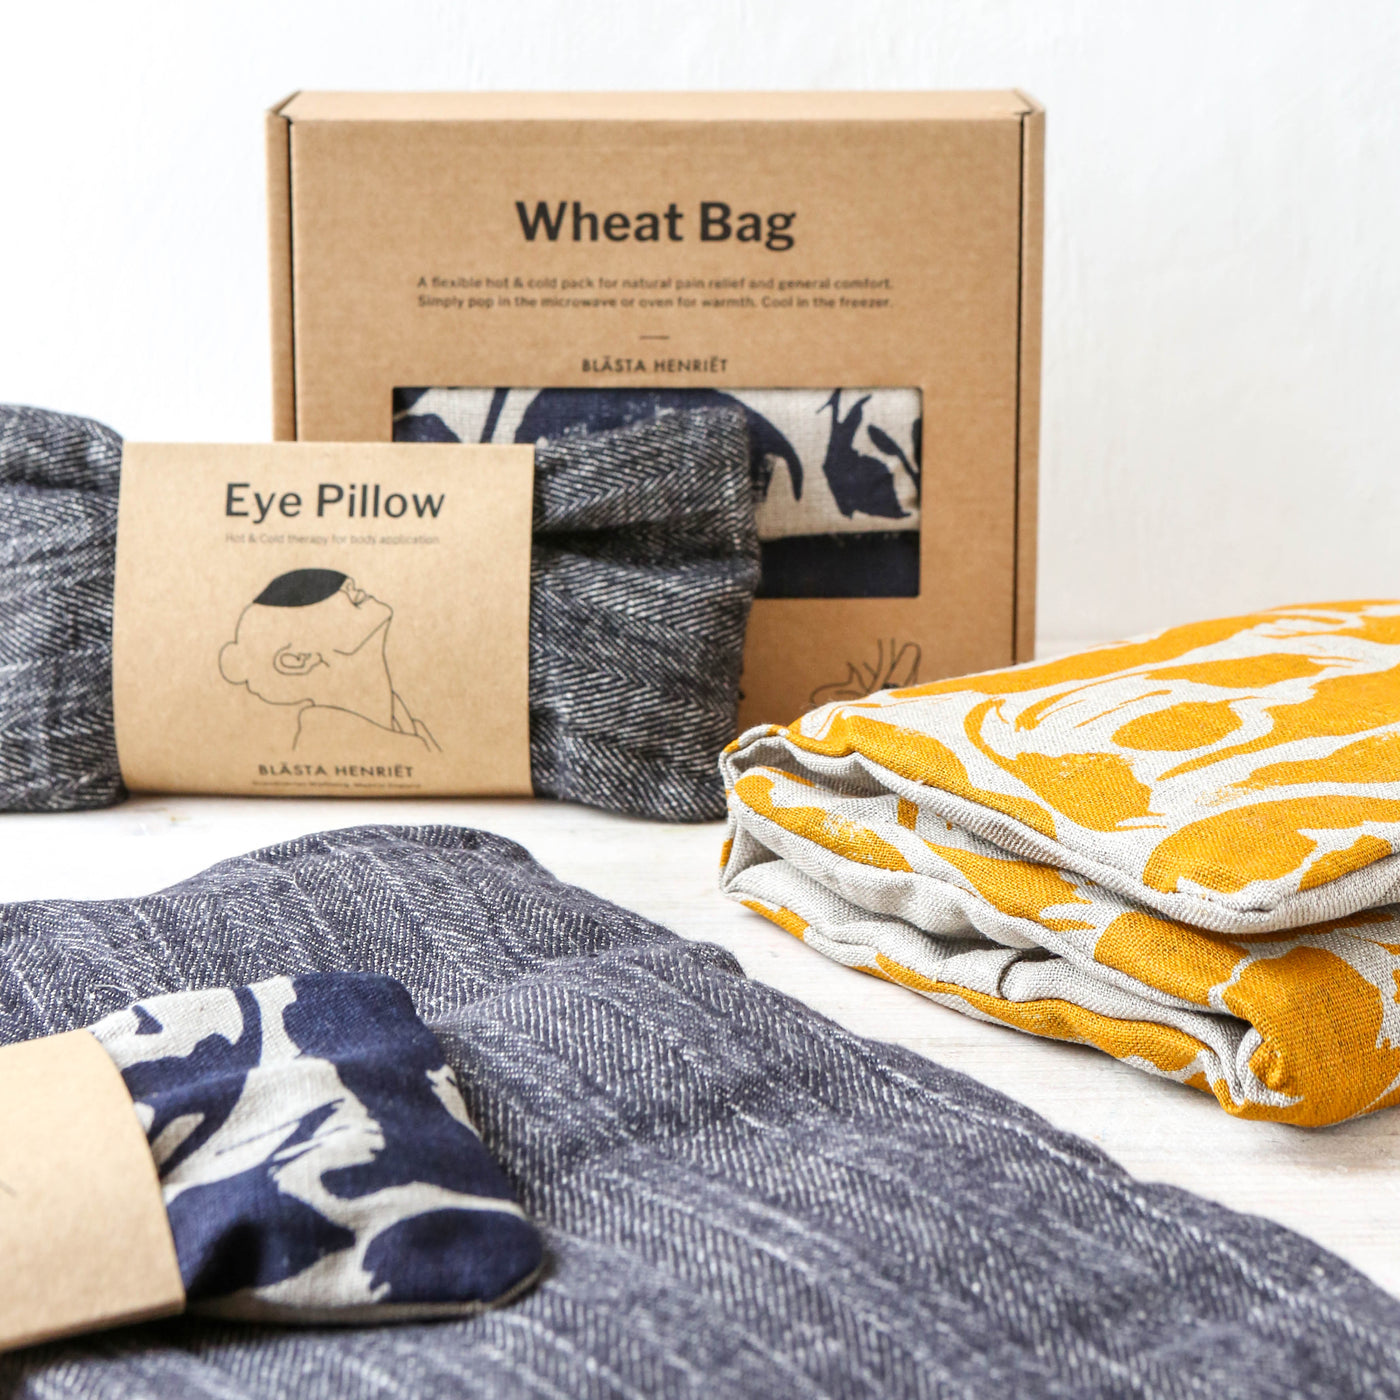 Linen Hot and Cold Eye Pillow - Navy